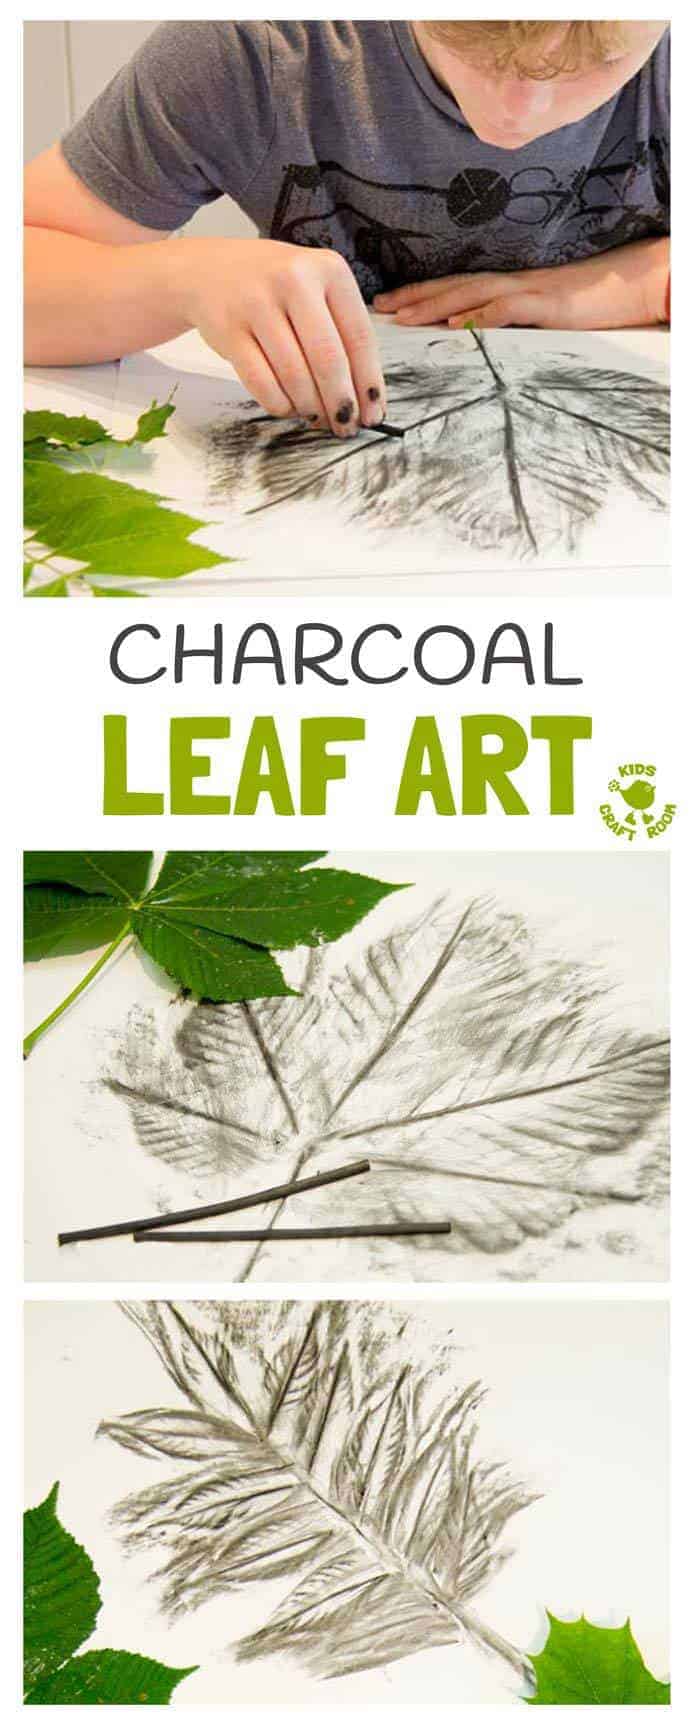 CHARCOAL LEAF ART- Charcoal is a super medium for kids to explore the shape, texture and patterns of leaves. An interesting leaf craft to try all year round. This leaf activity makes a great Fall art idea and nature craft for all year round. #kidsart #artforkids #drawing #drawingideas #kidsdrawing #processart #teachingideas #artideas #leafart #leafpictures #leafdrawings #leaves #charcoal #charcoalart #naturecrafts #kidscrafts #kidsactivities #kidscraftroom